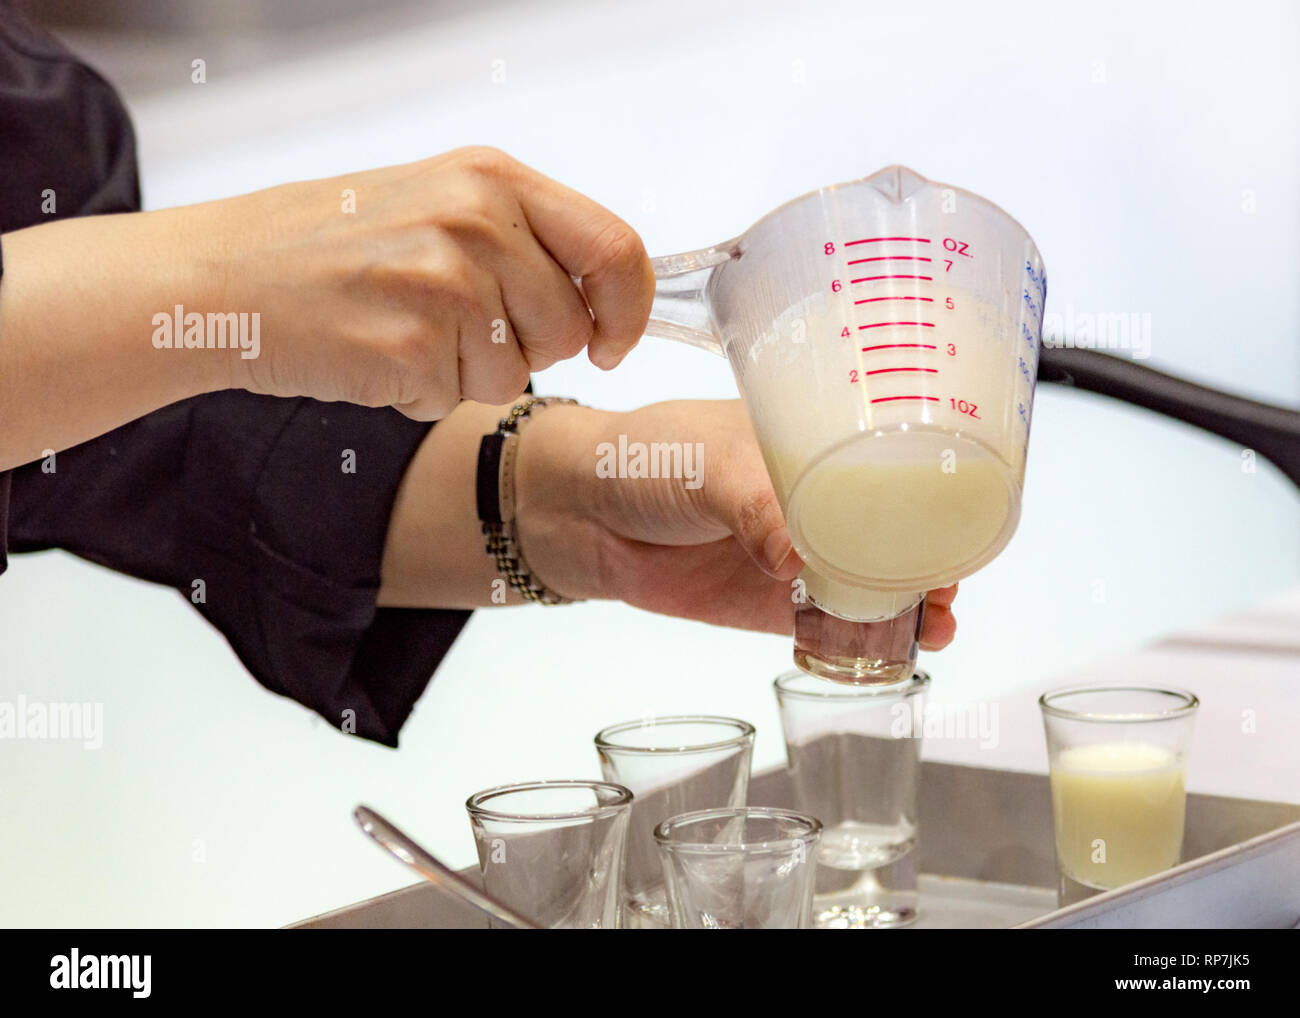 Measuring out milk in a measuring jug for cooking or test Stock Photo